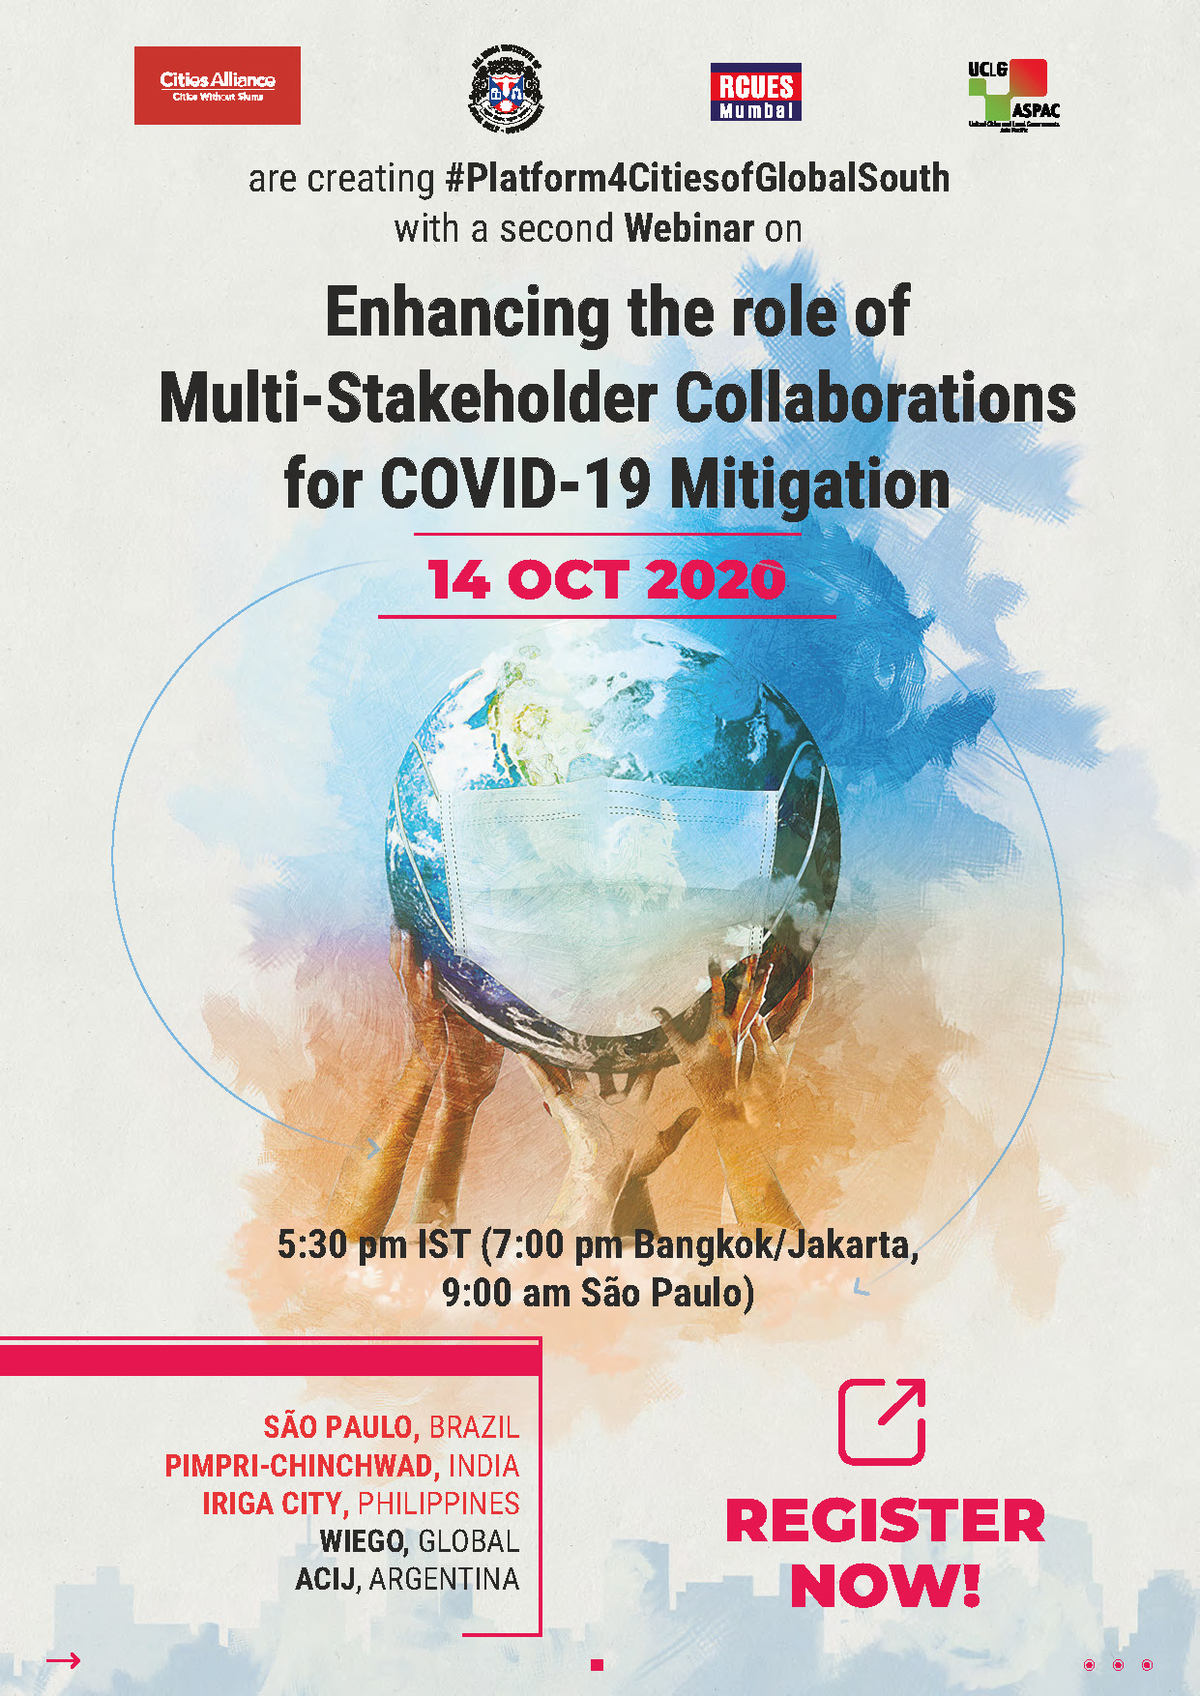 Enhancing the role of Multi-Stakeholder Collaborations for COVID-19 Mitigation (1).jpg